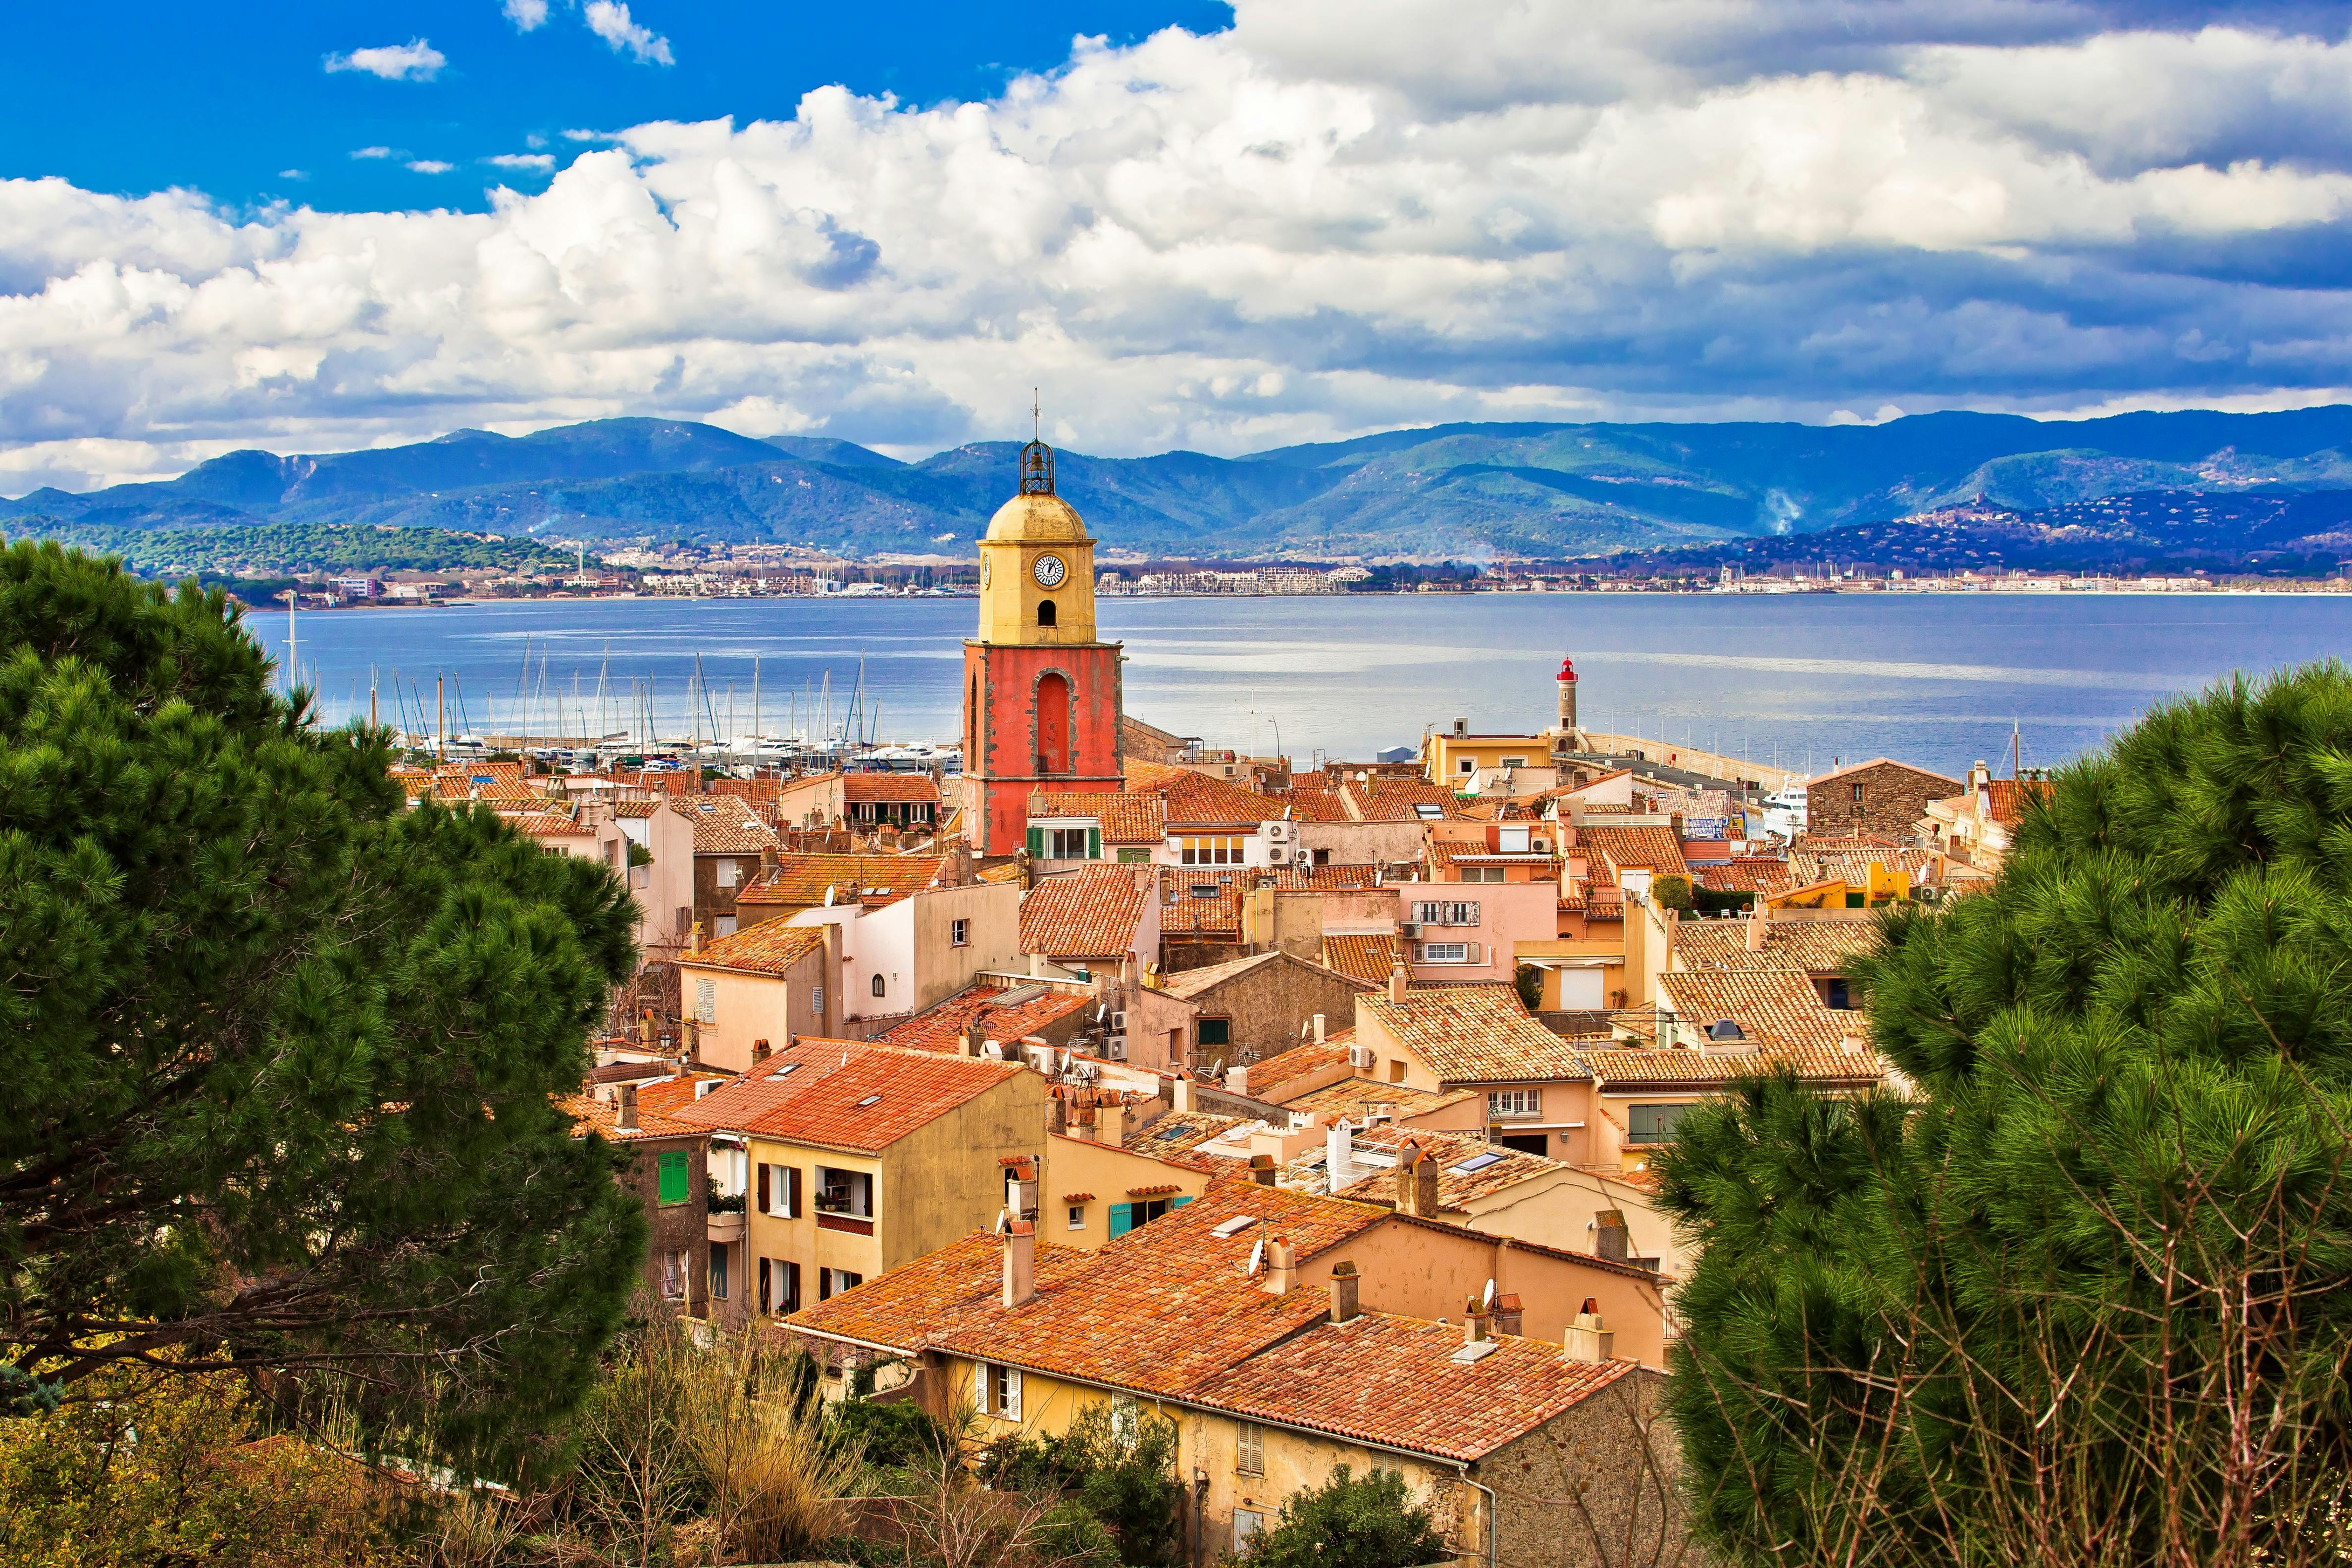 Private tour of Saint-Tropez & Port Grimaud from Nice